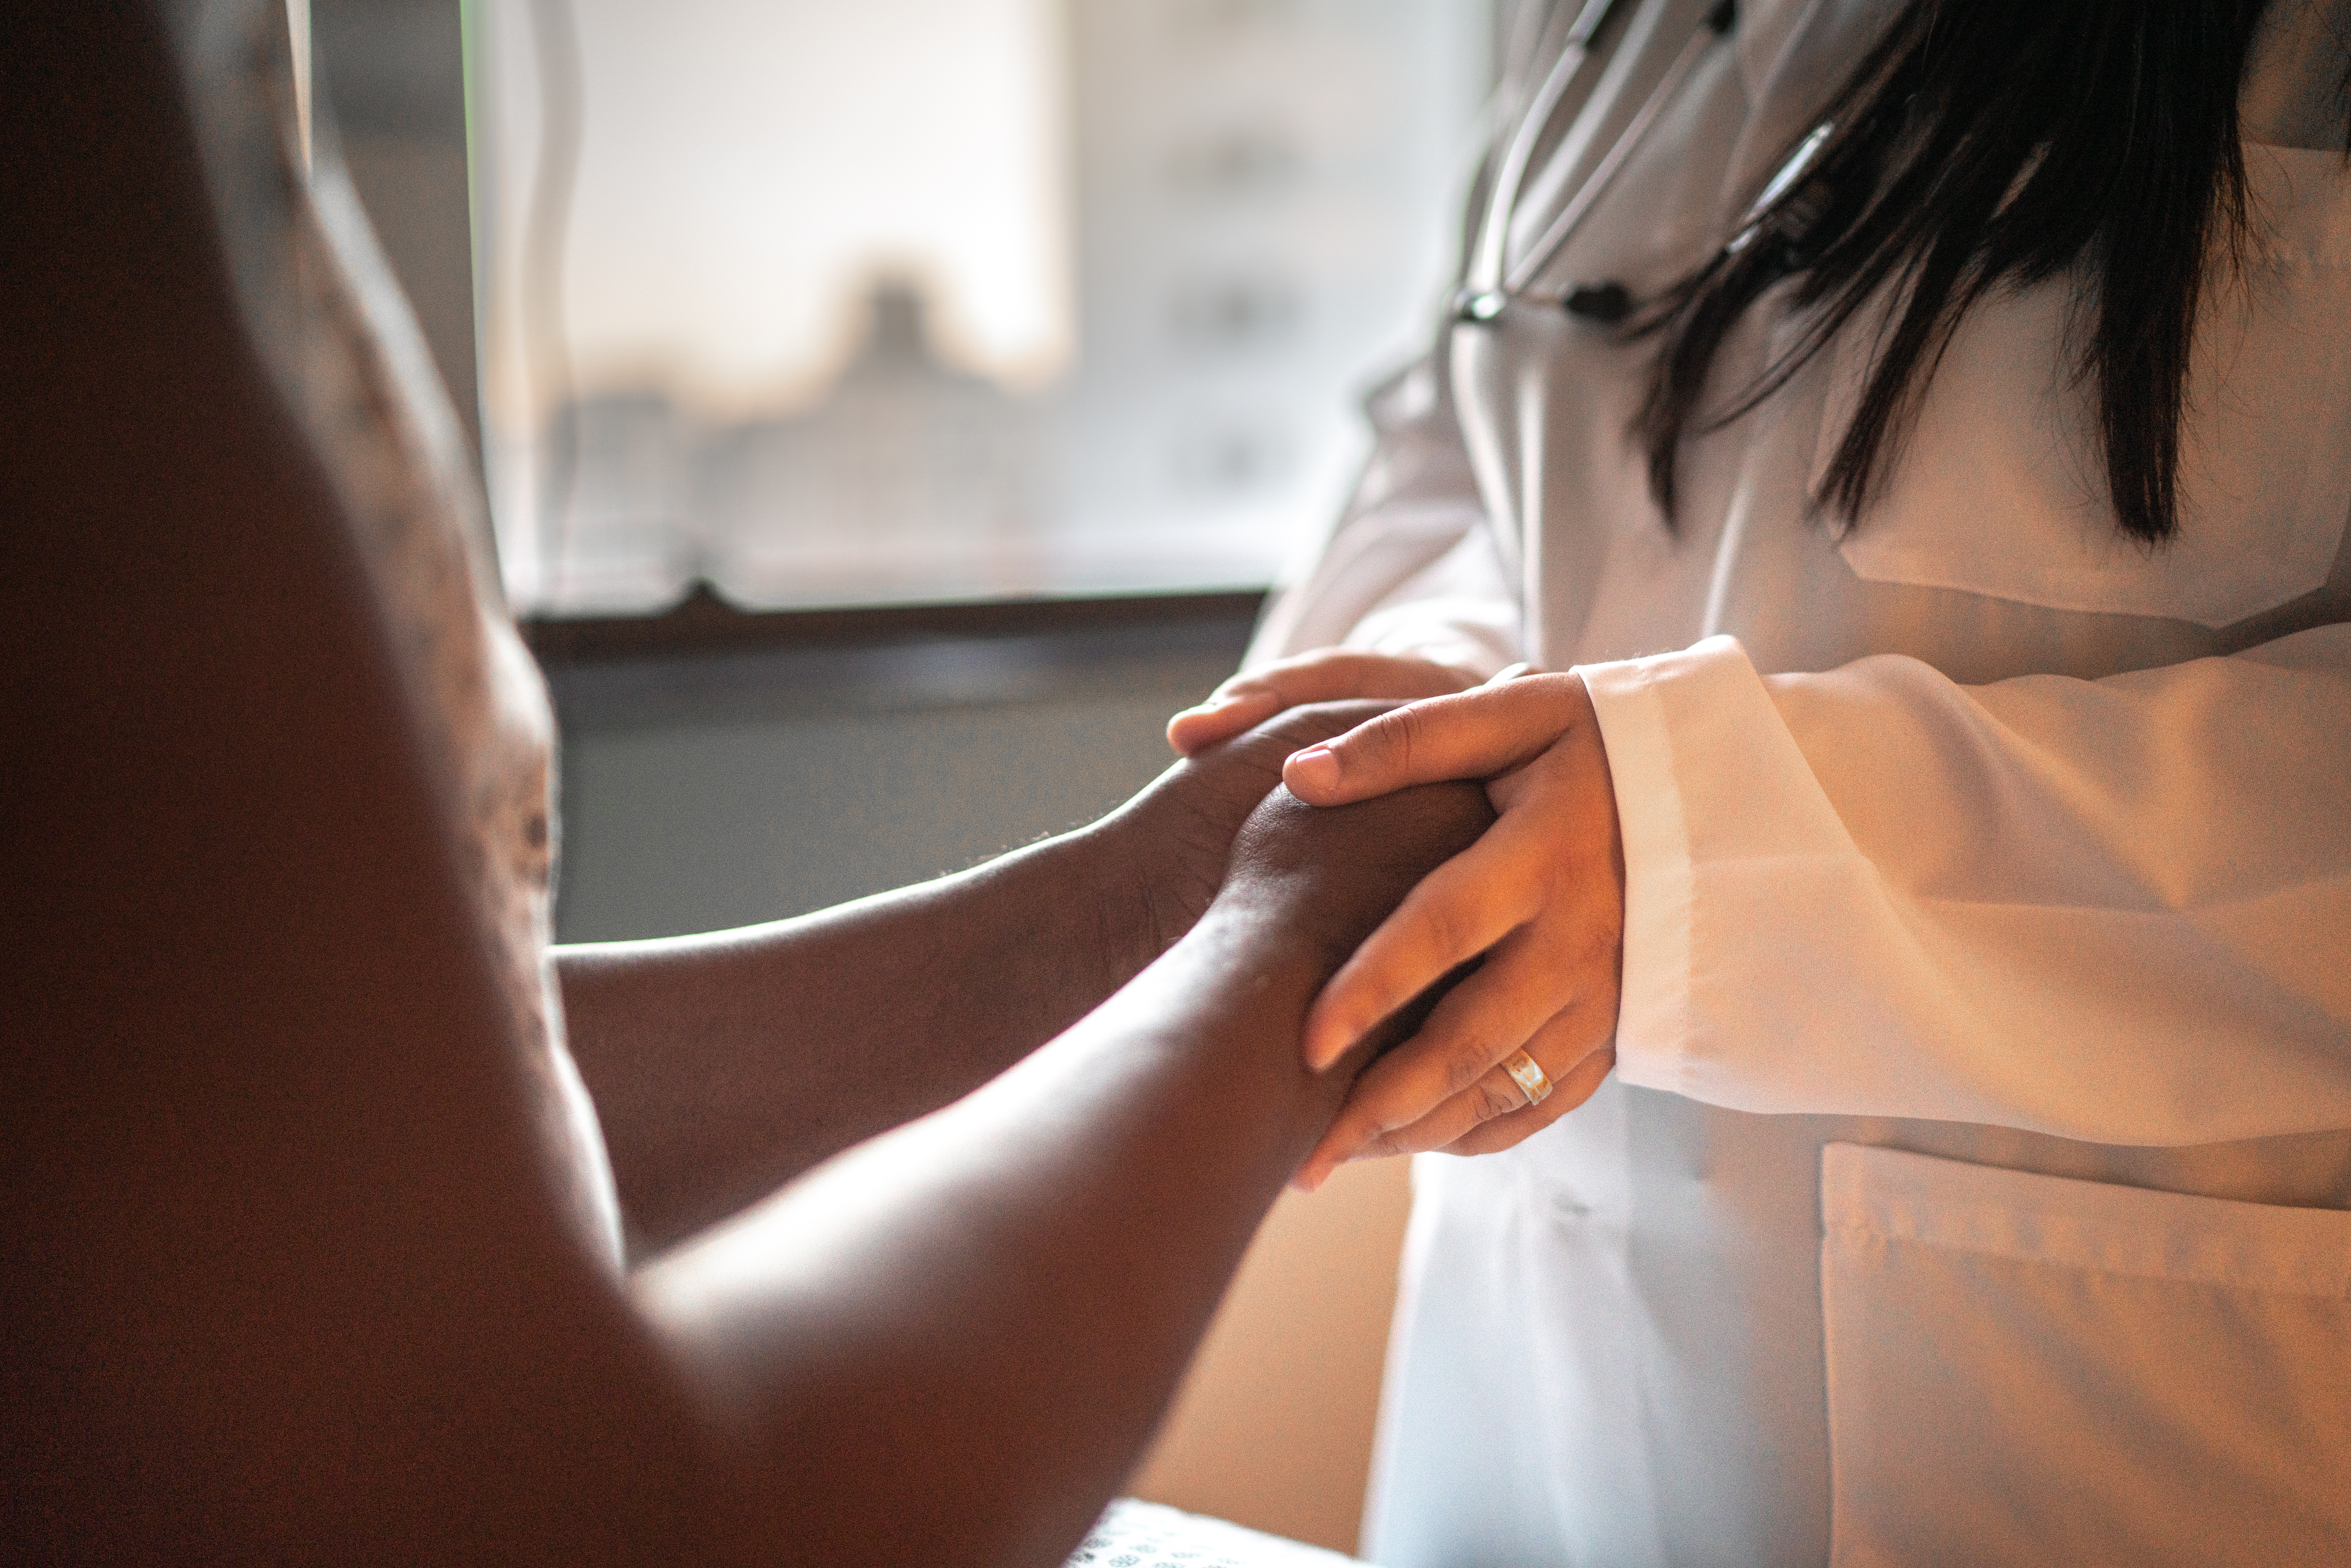 Medical professional in a white coat clasping the hands of a patient.